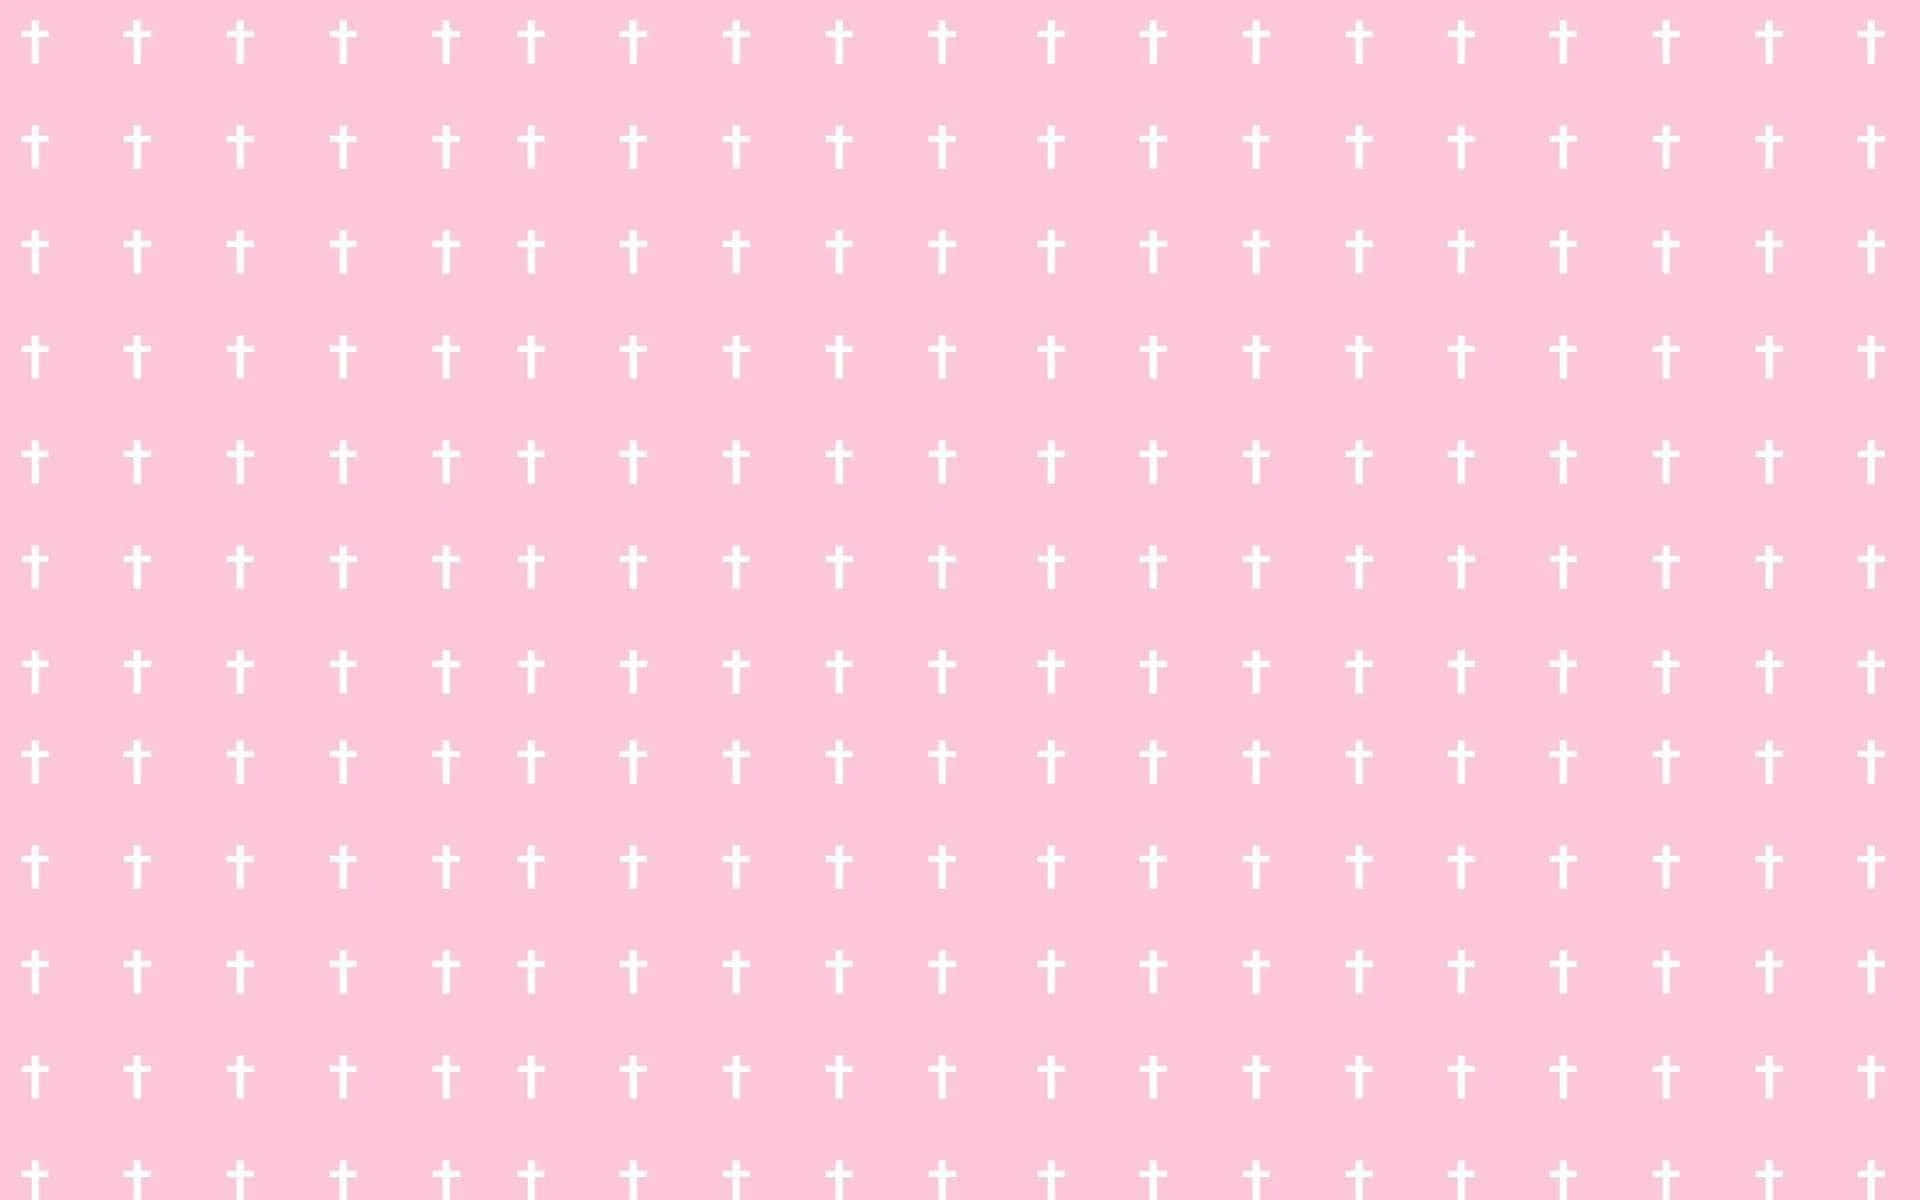 Download A Pink Background With White Crosses On It | Wallpapers.com